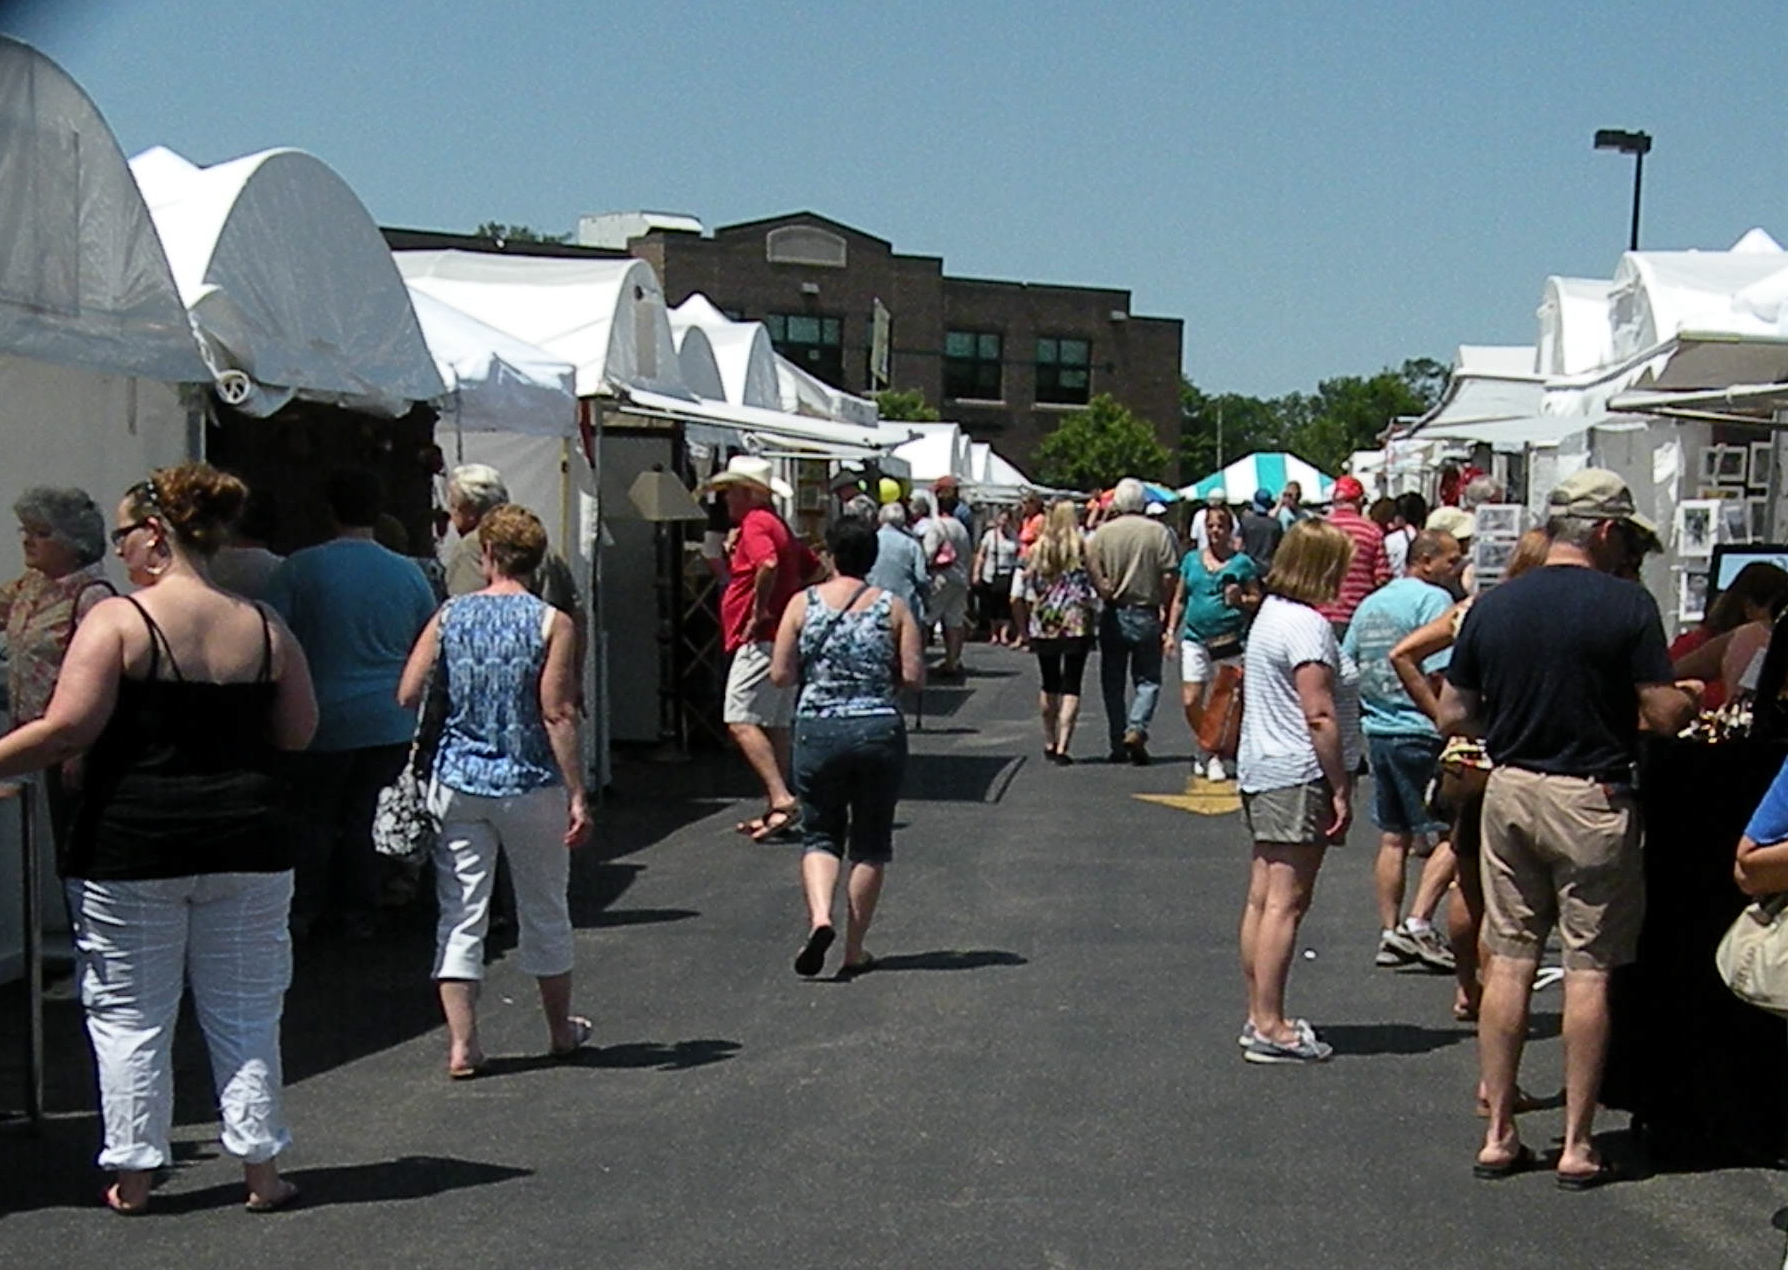 Annual Roycroft Summer Festival to feature juried artisans, music and